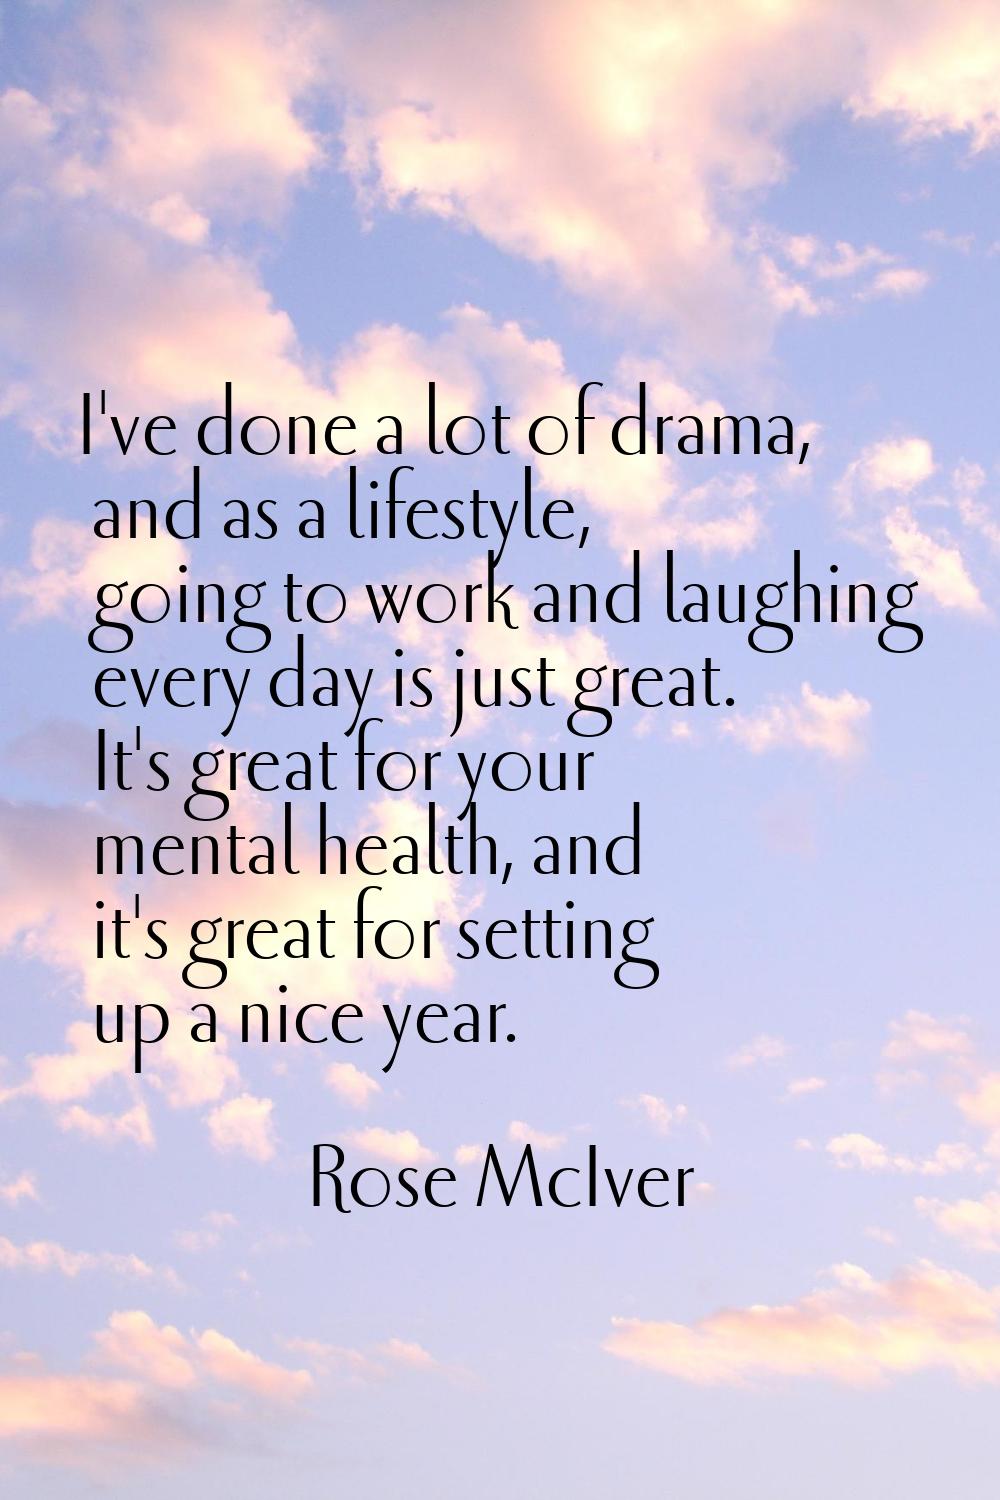 I've done a lot of drama, and as a lifestyle, going to work and laughing every day is just great. I